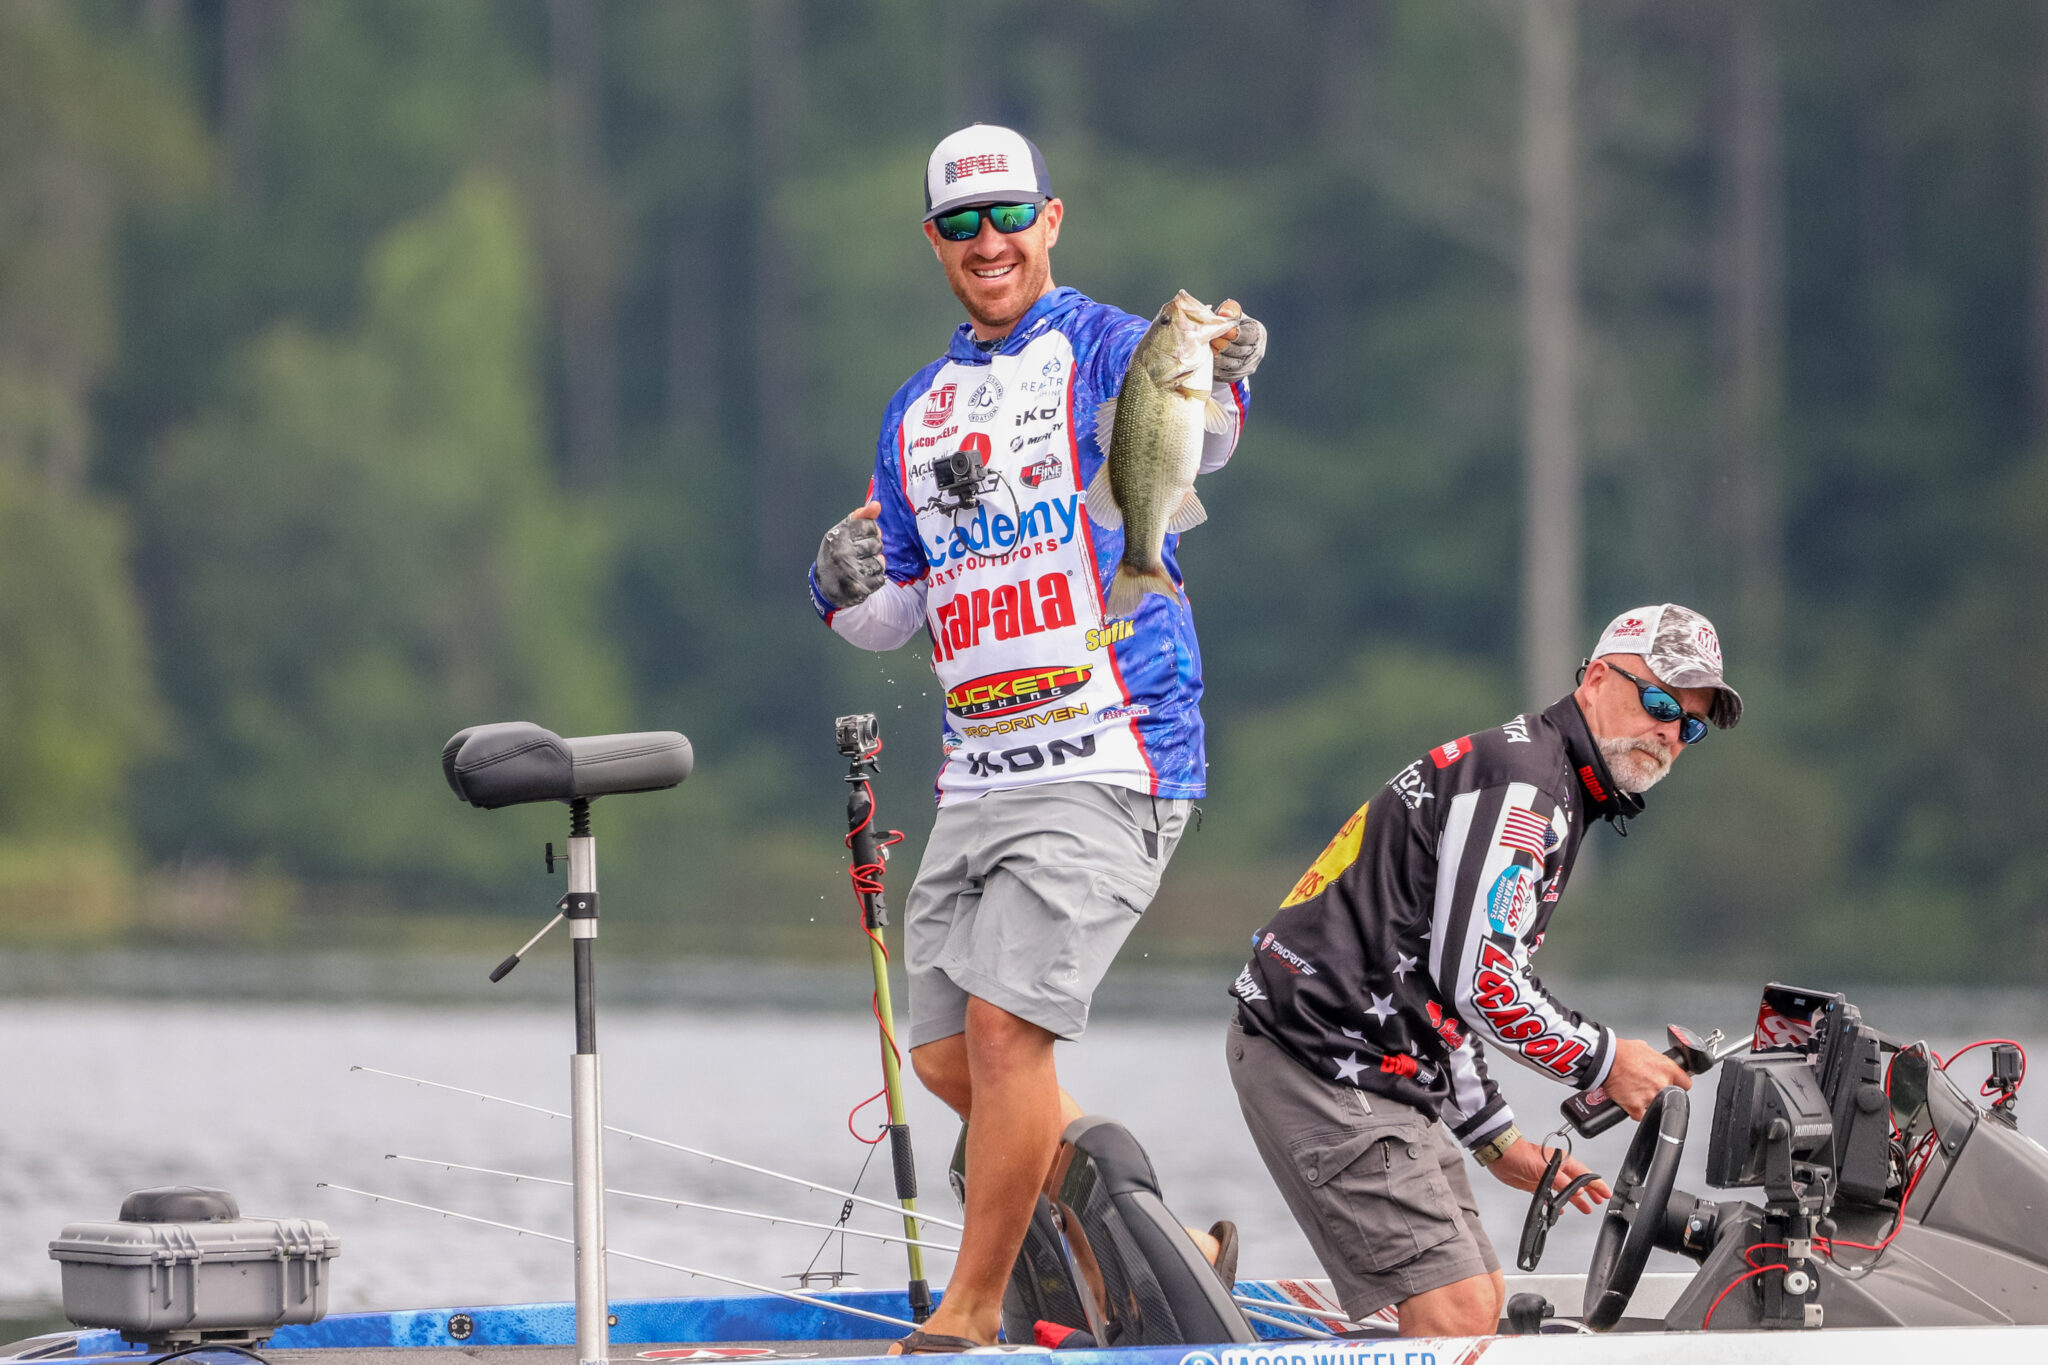 KEVIN VANDAM: The Truths About Water Temperature - Major League